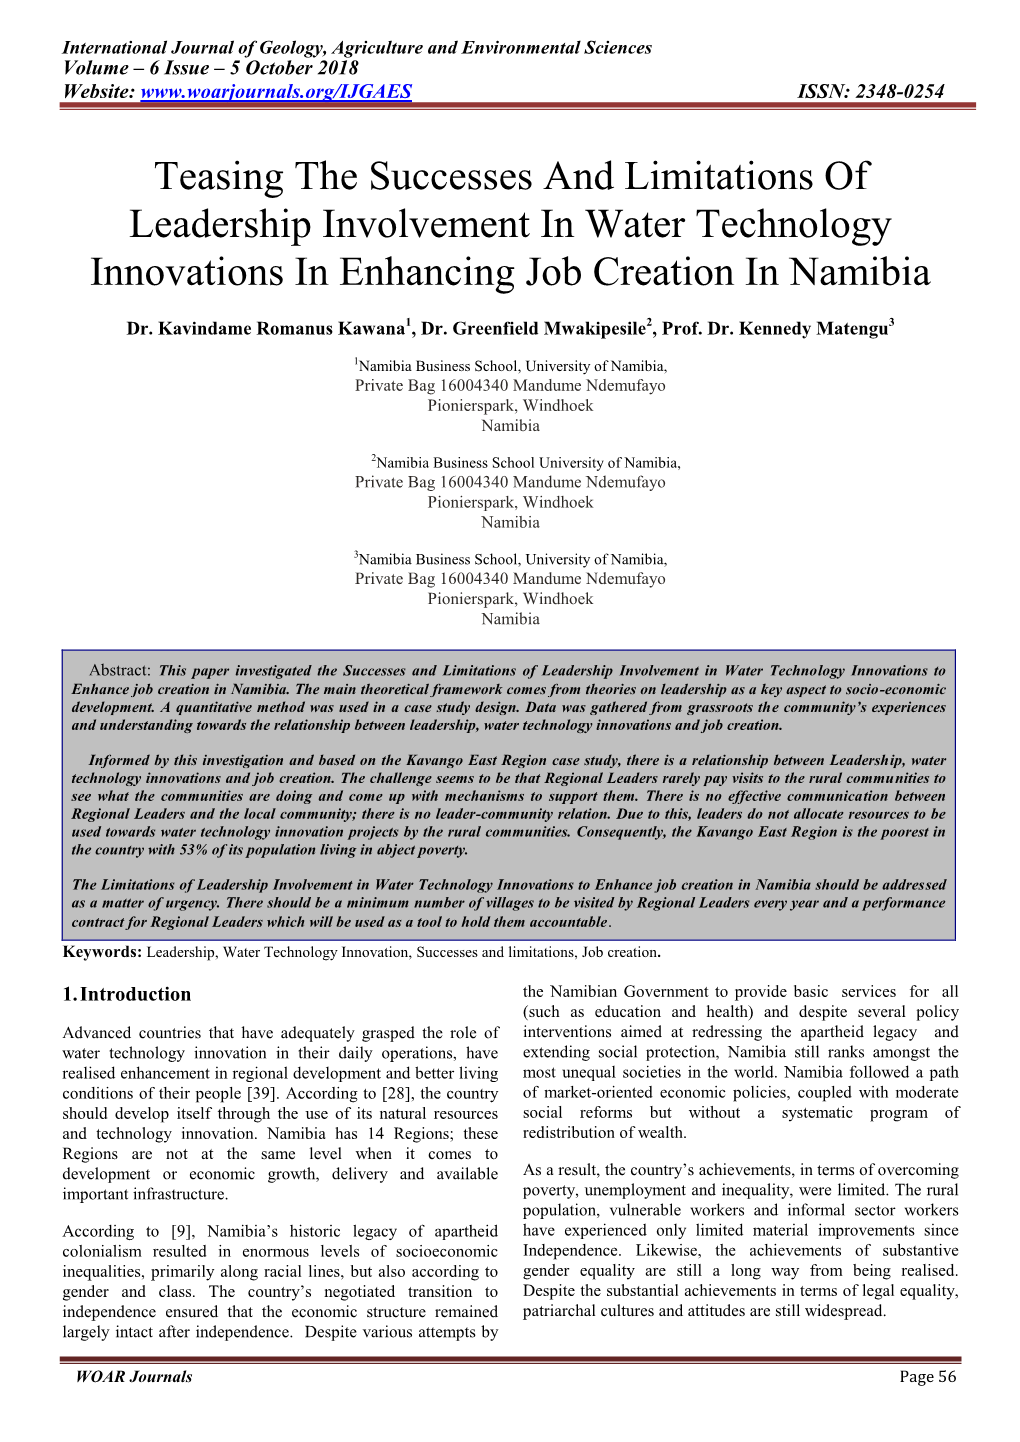 Teasing the Successes and Limitations of Leadership Involvement in Water Technology Innovations in Enhancing Job Creation in Namibia